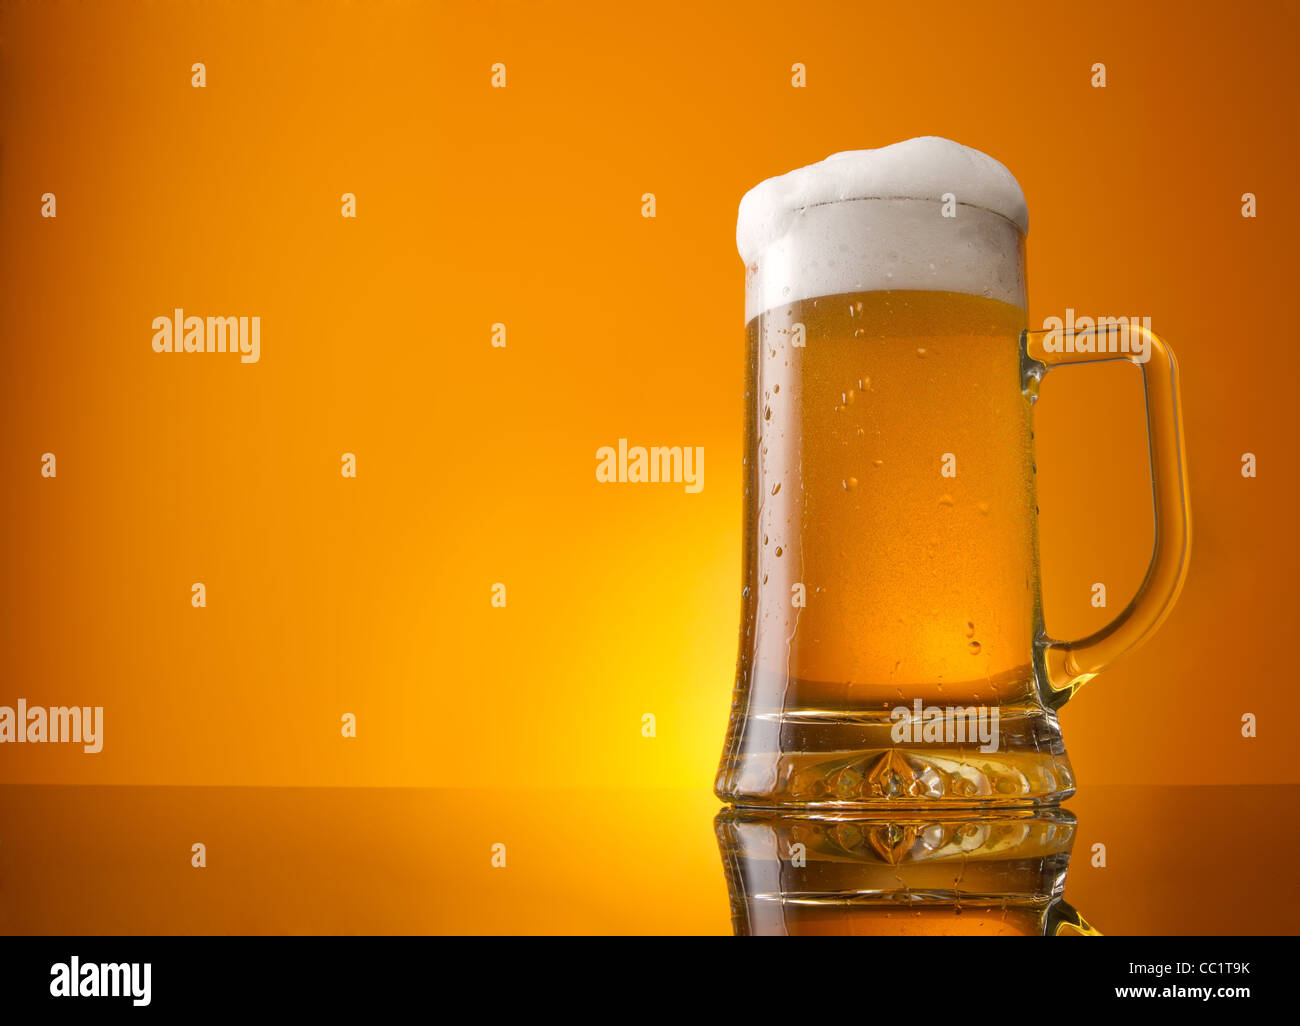 Glass of beer close-up with froth over orange background Stock Photo